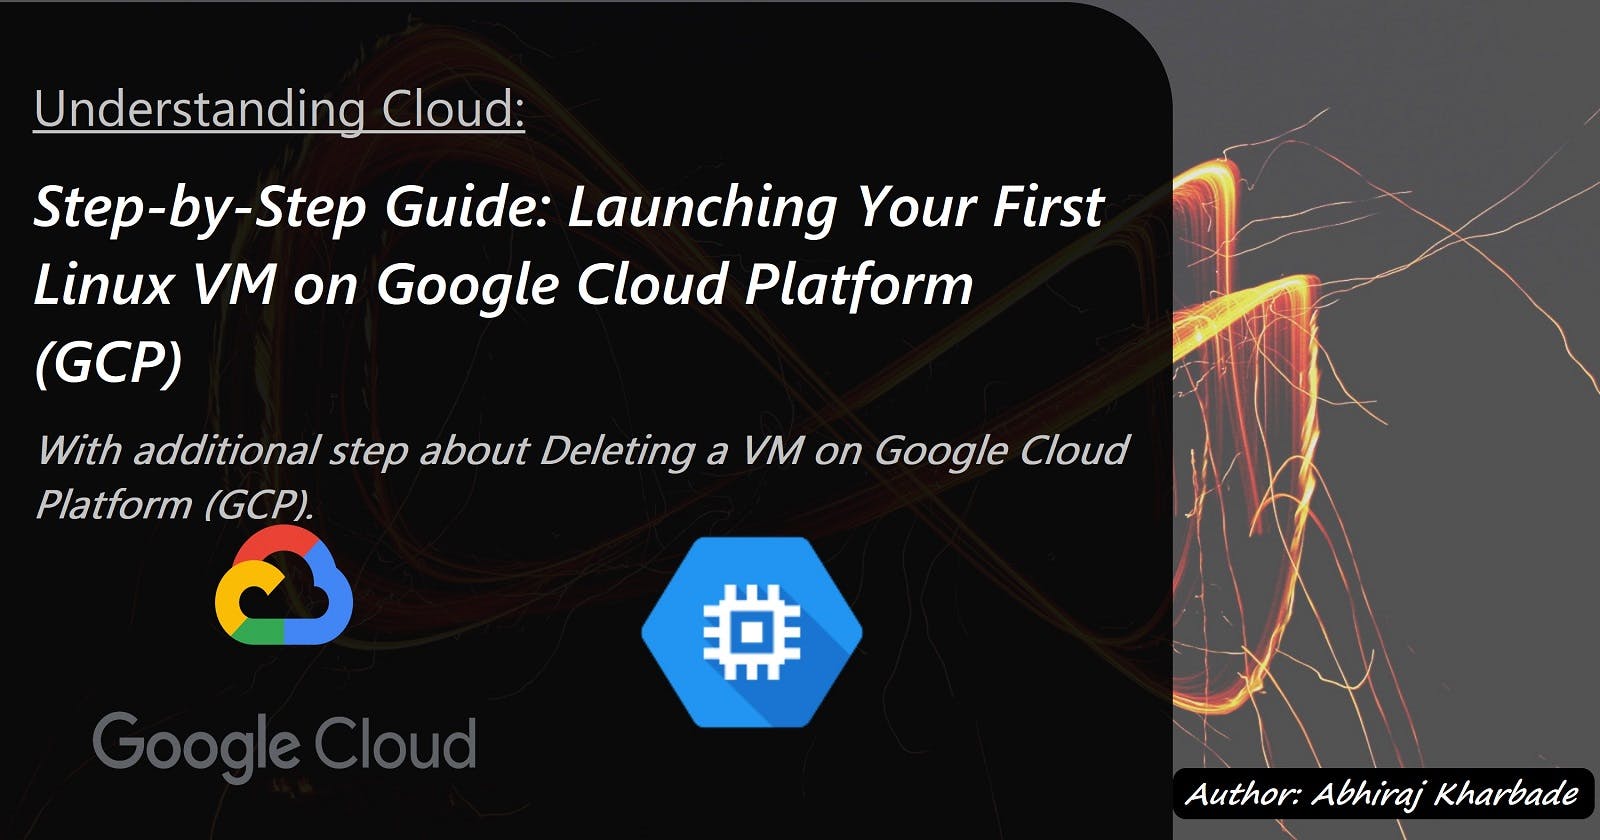 Step-by-Step Guide: Launching Your First Linux VM on Google Cloud Platform (GCP)